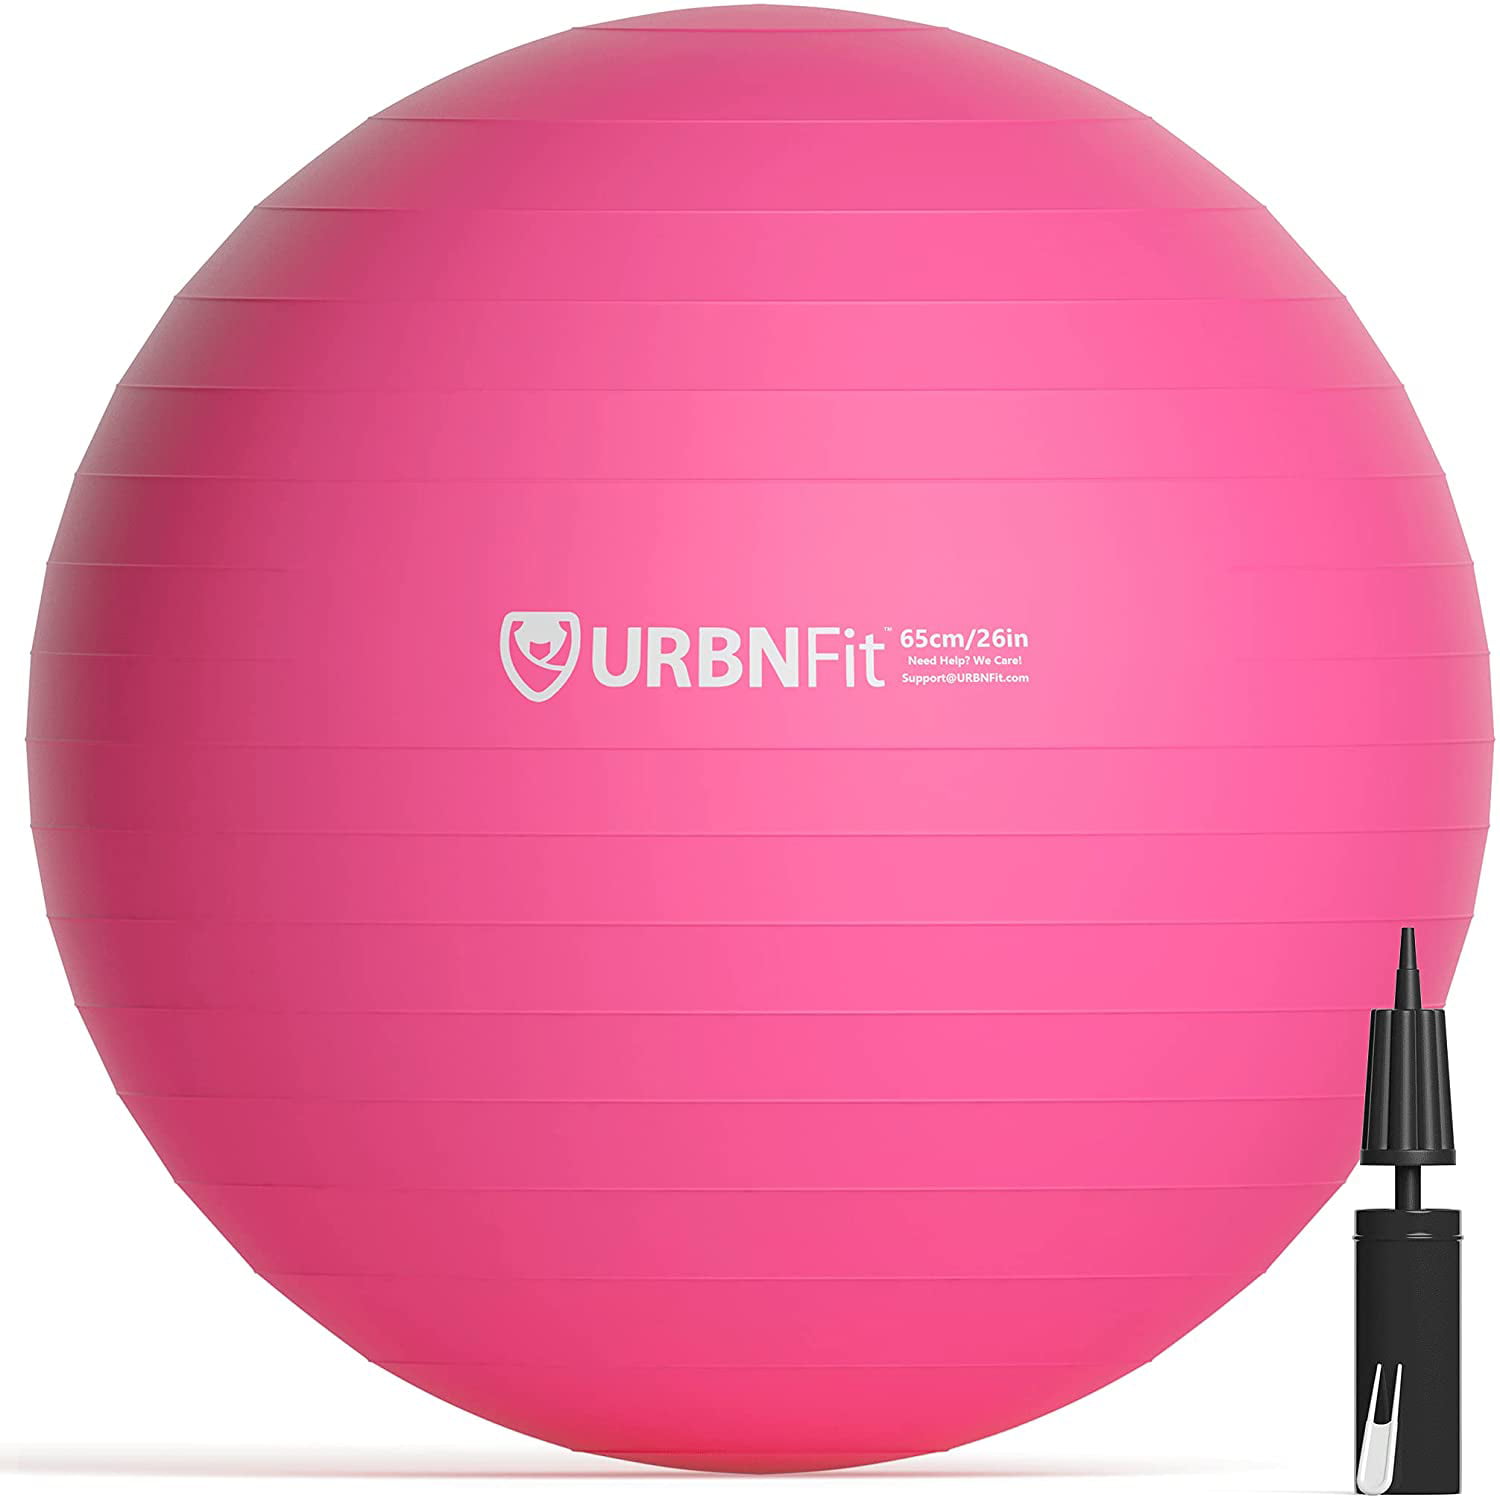 URBNFit Exercise Ball Yoga Ball for Workout Pregnancy Stability Home Gym AntiBurst Swiss Balance Ball w/ Pump Fitness Ball Chair for Office 